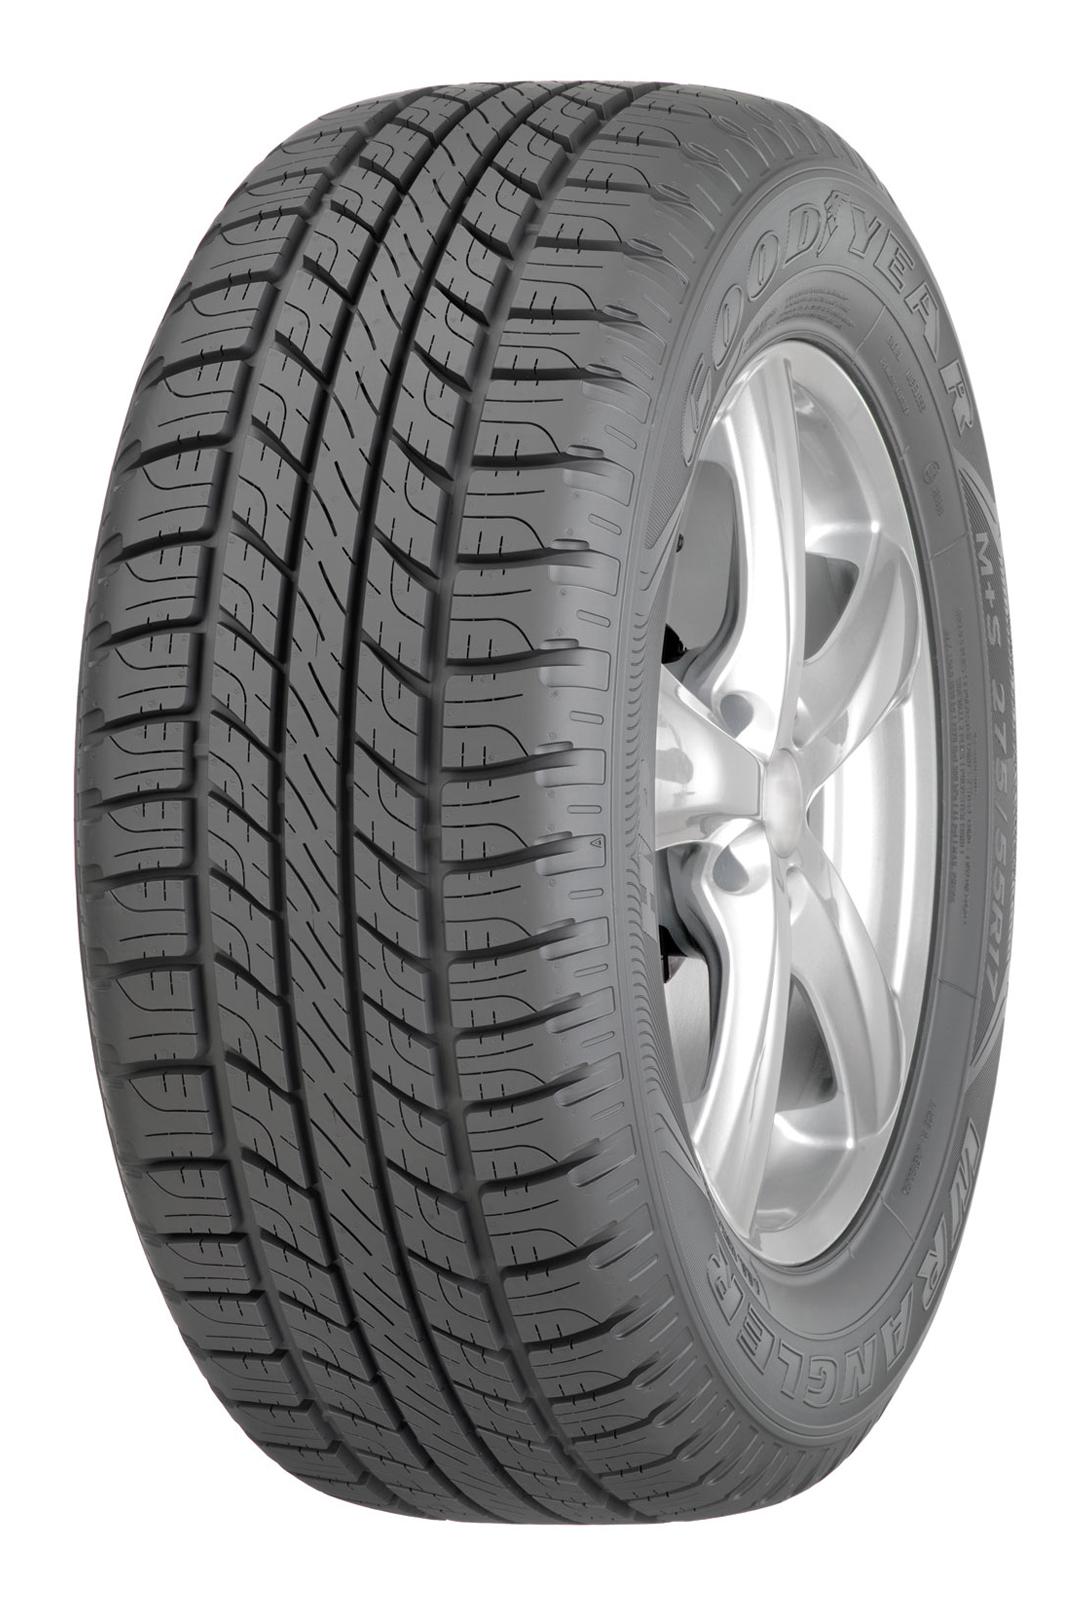 Goodyear WRANGLER HP ALL WEATHER 235/55 R19 WRL HP ALL WEATHER 105V XL FP M+S ...